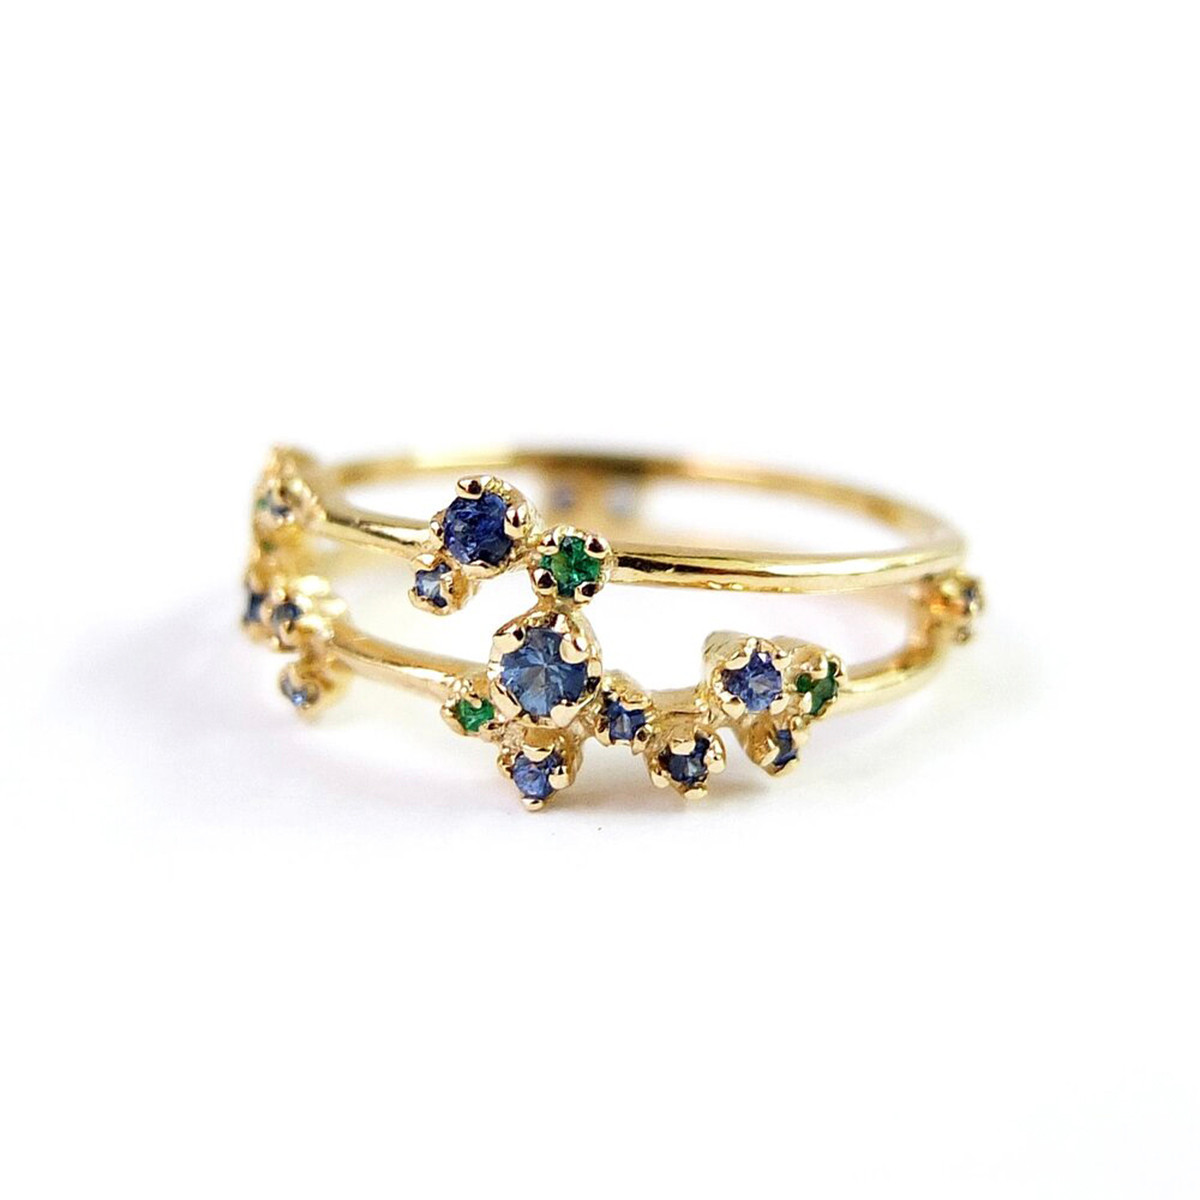 Sparkler Double Band Ring with Blue Sapphire + Emerald by N+A New York, Noriko and Akiko Sugawara available to buy online at tomfoolery london